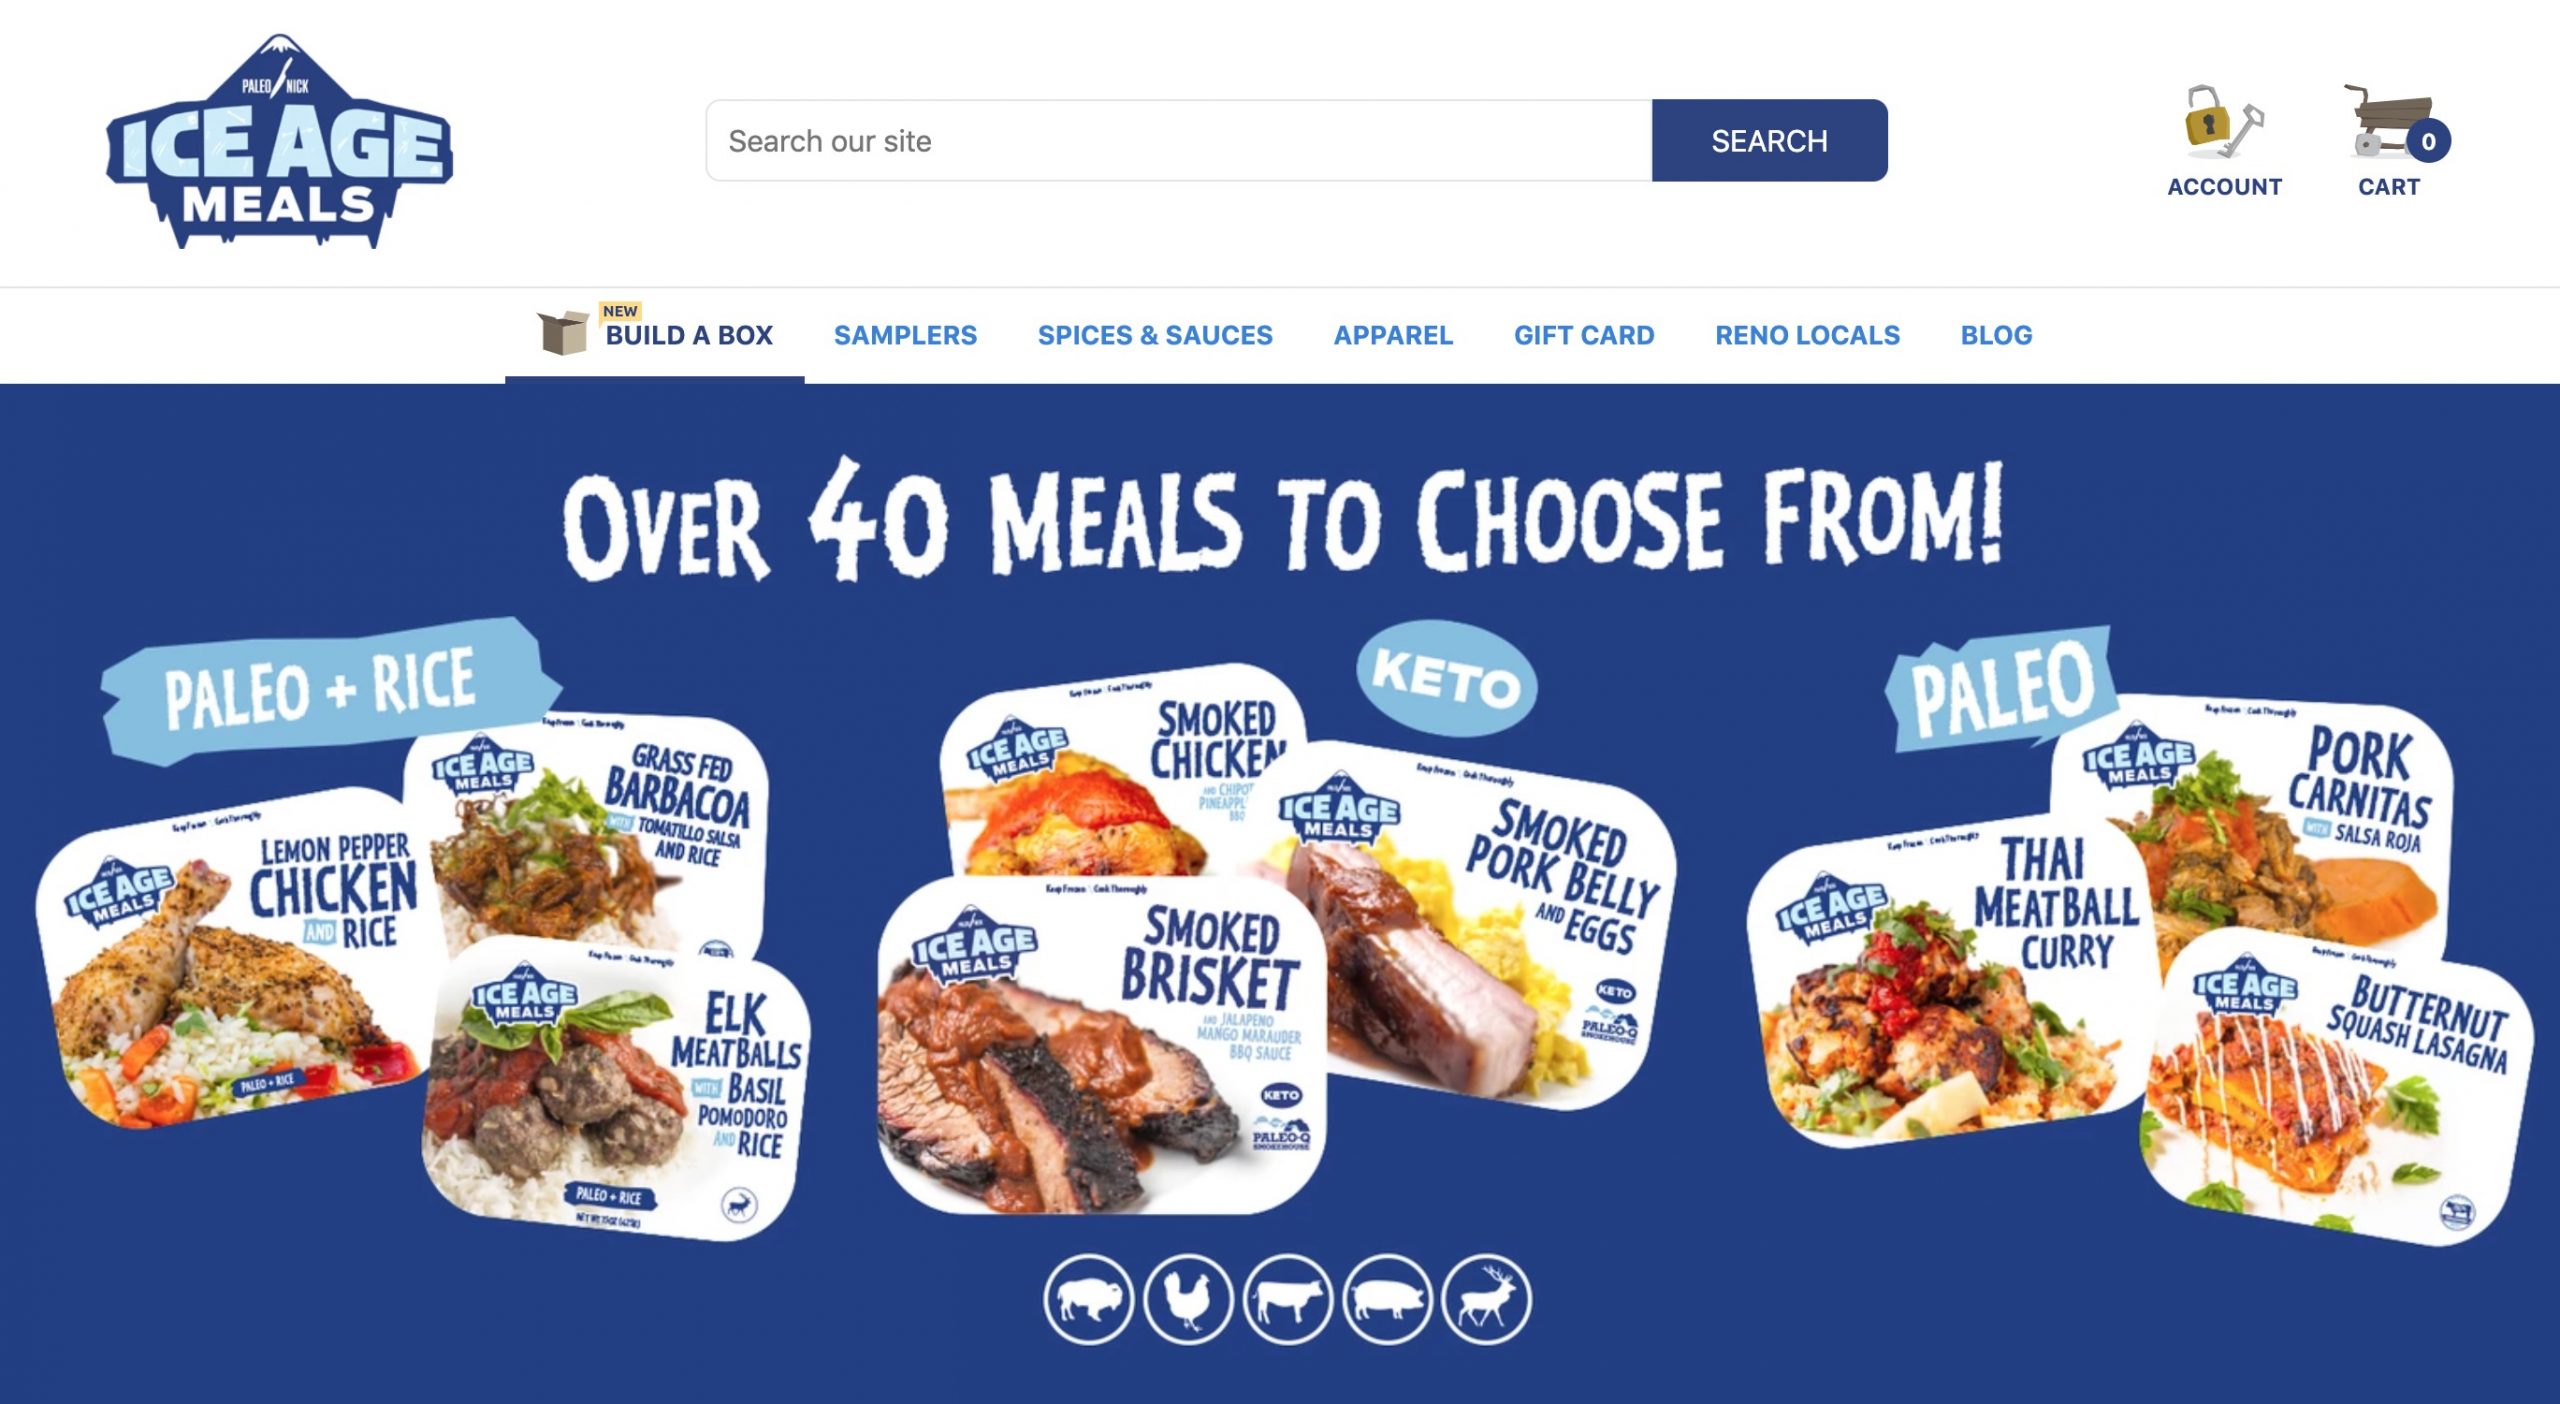 Ice Age Meals main page